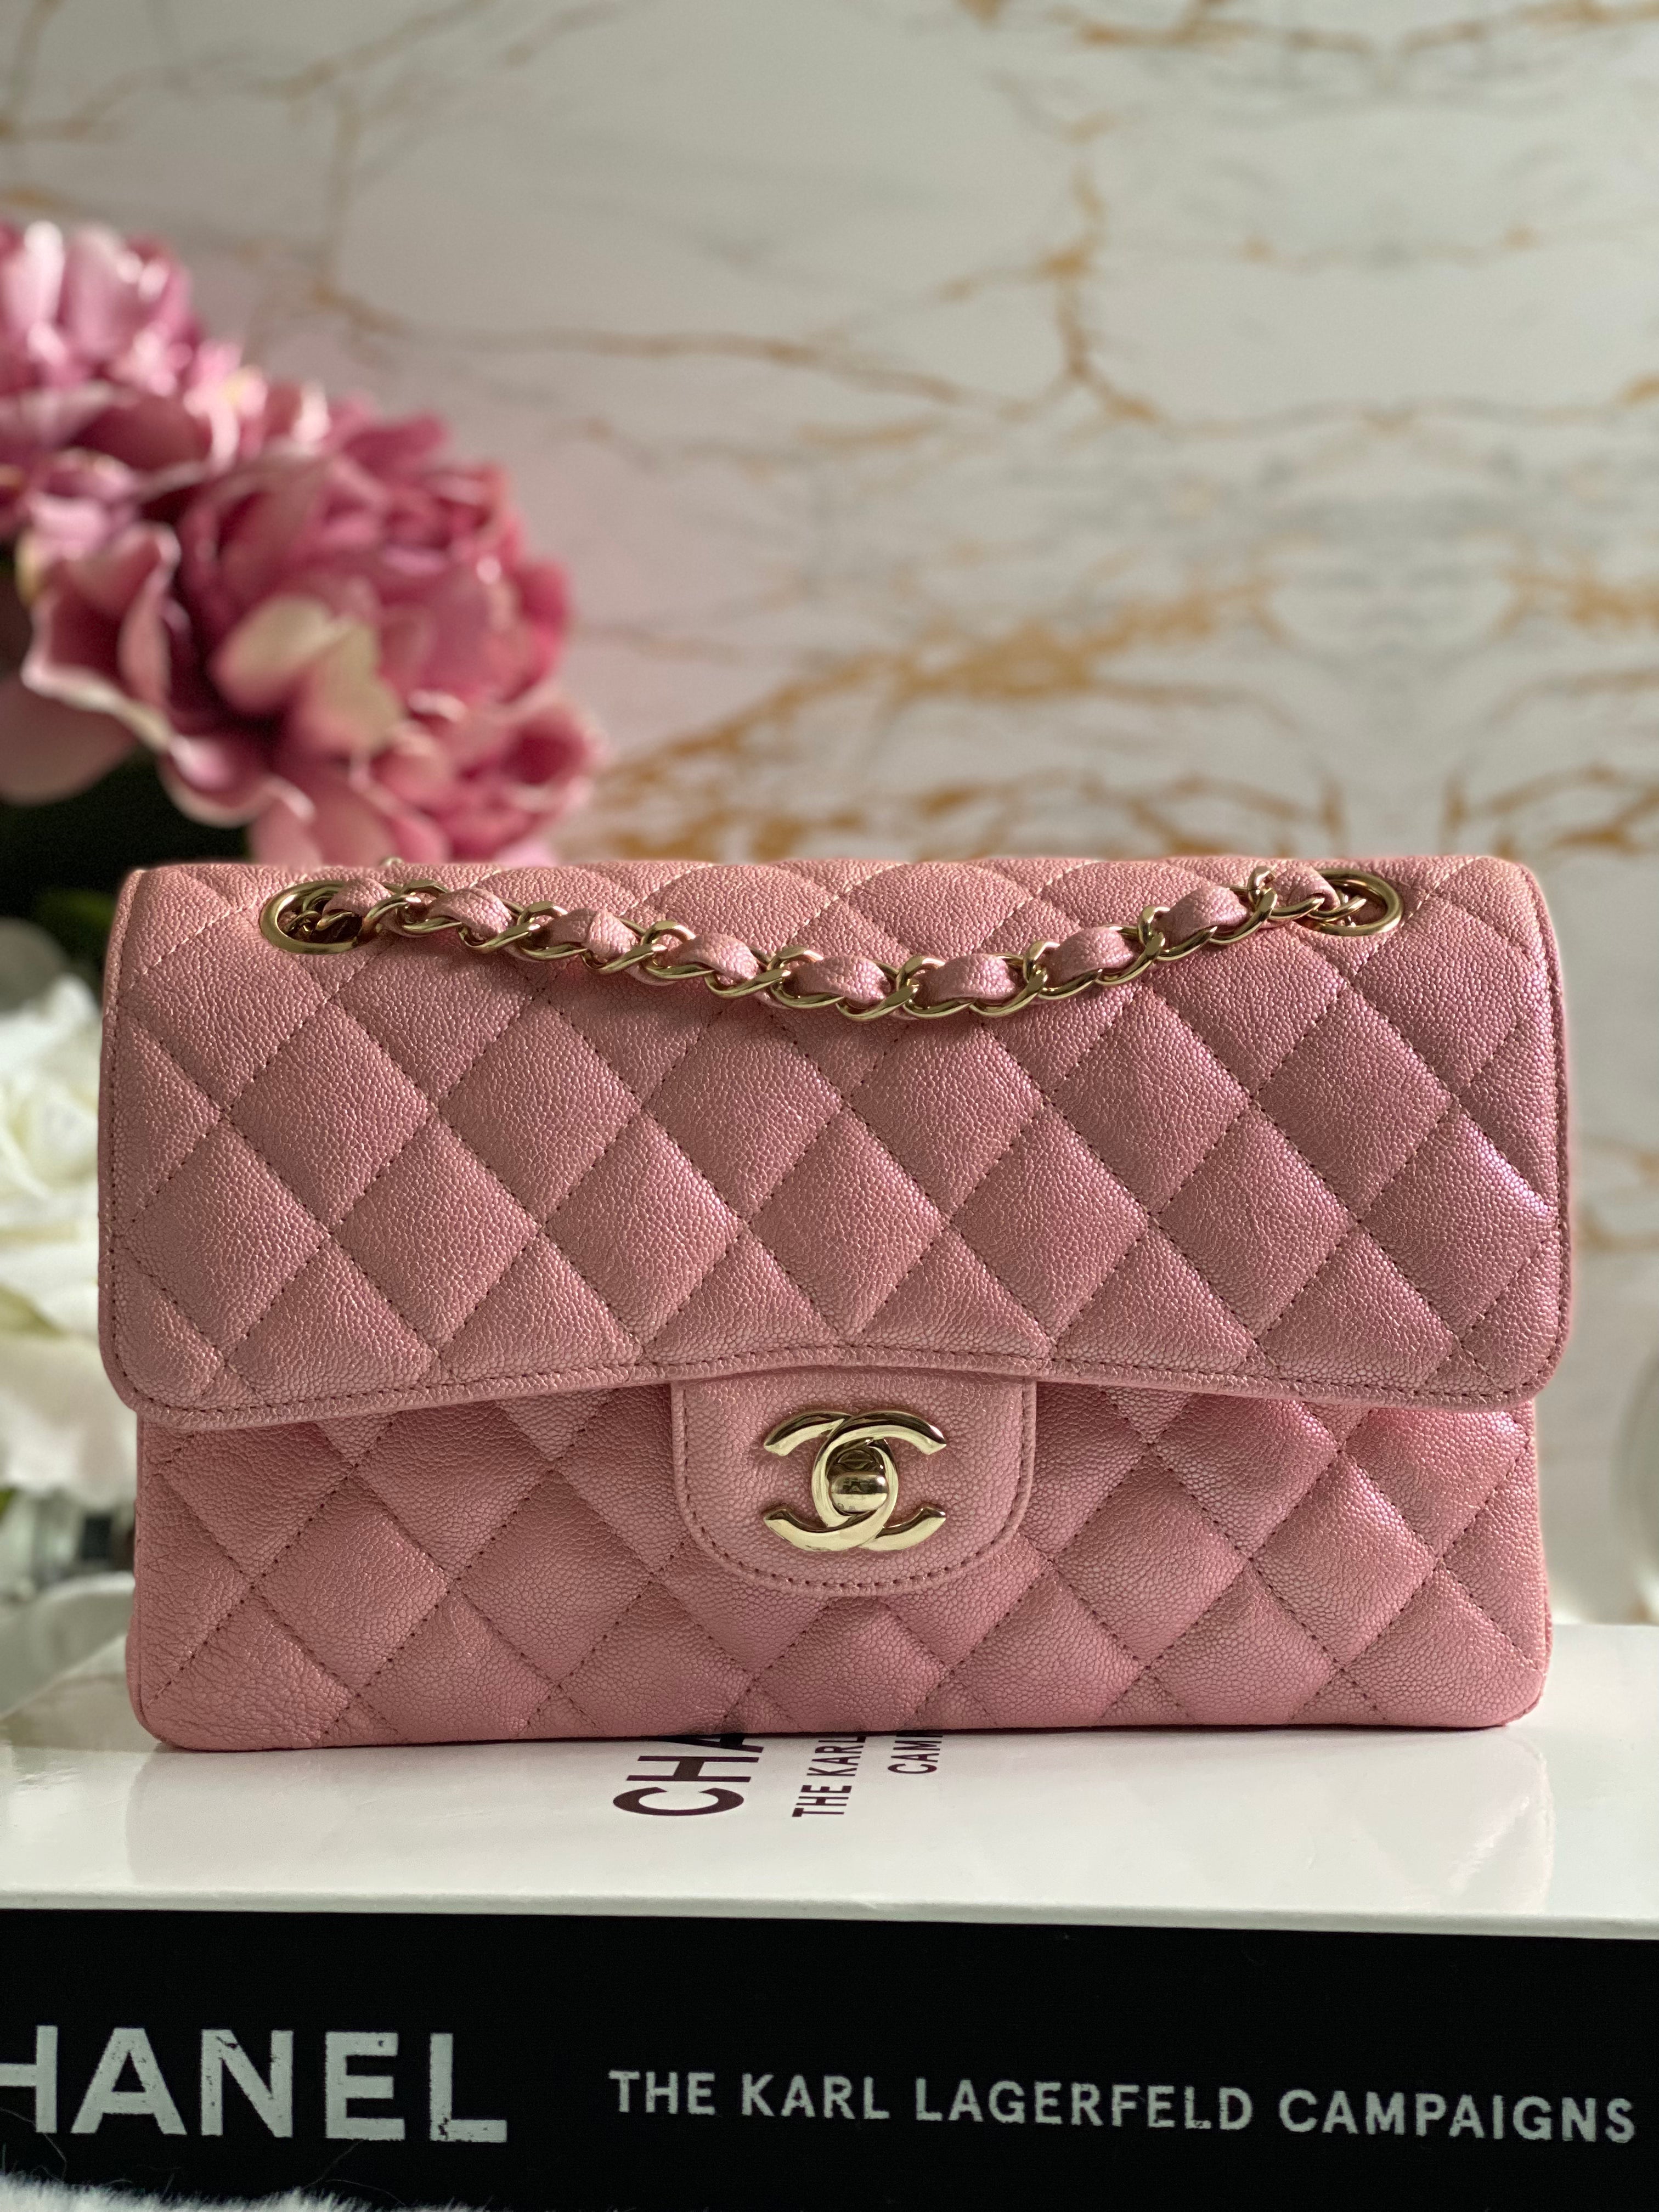 Chanel Blue Quilted Caviar Small Classic Double Flap Bag For Sale